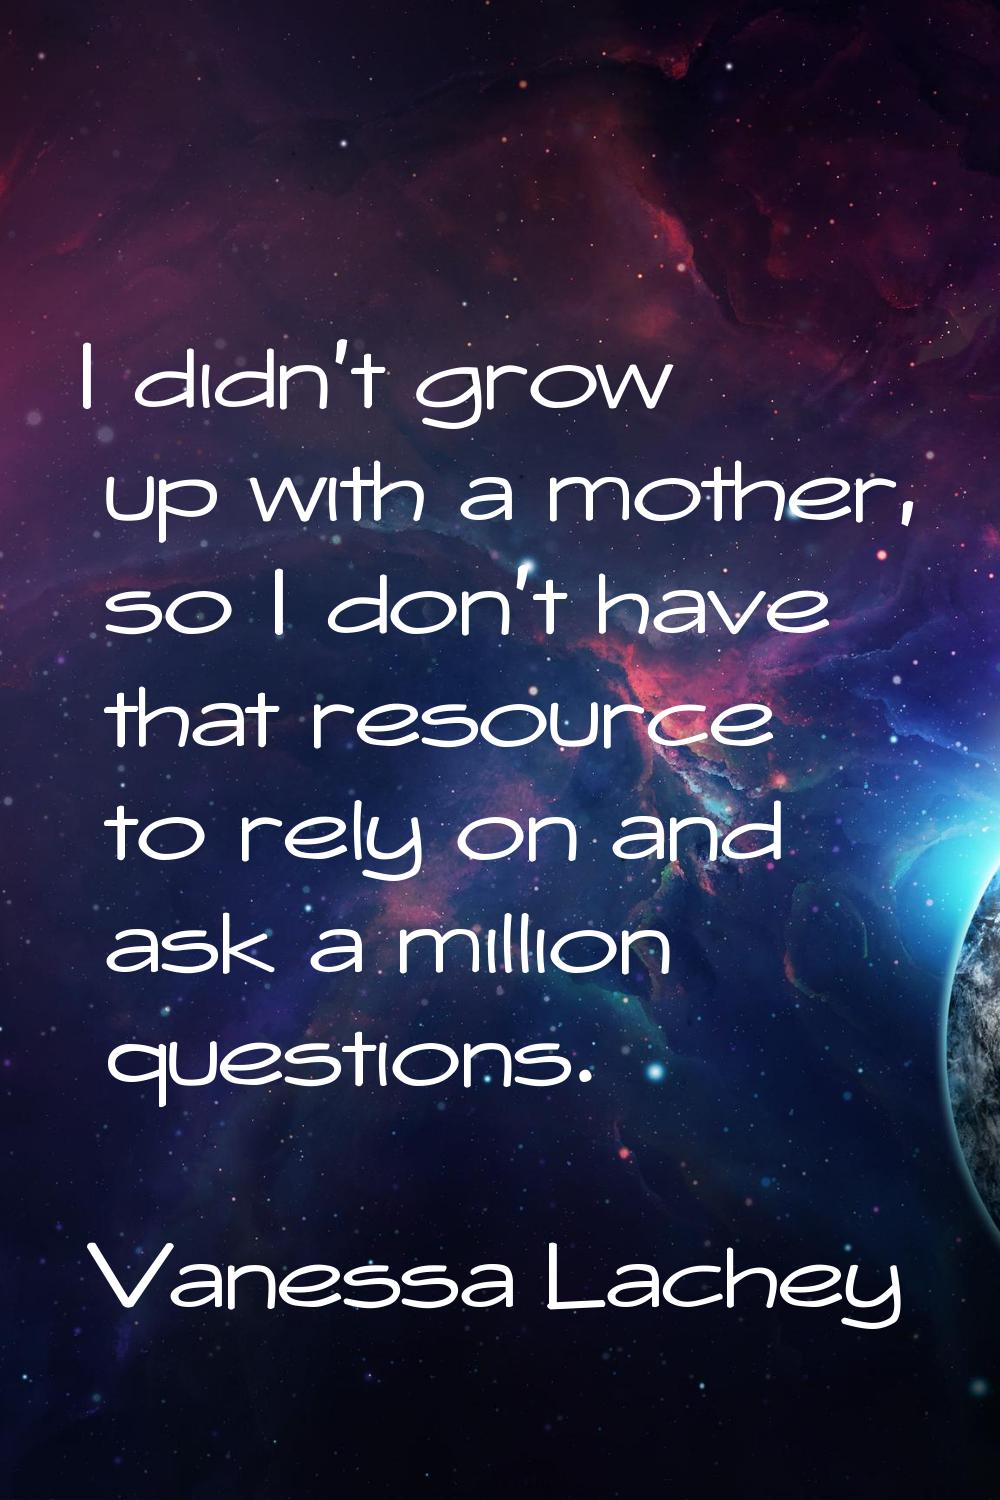 I didn't grow up with a mother, so I don't have that resource to rely on and ask a million question